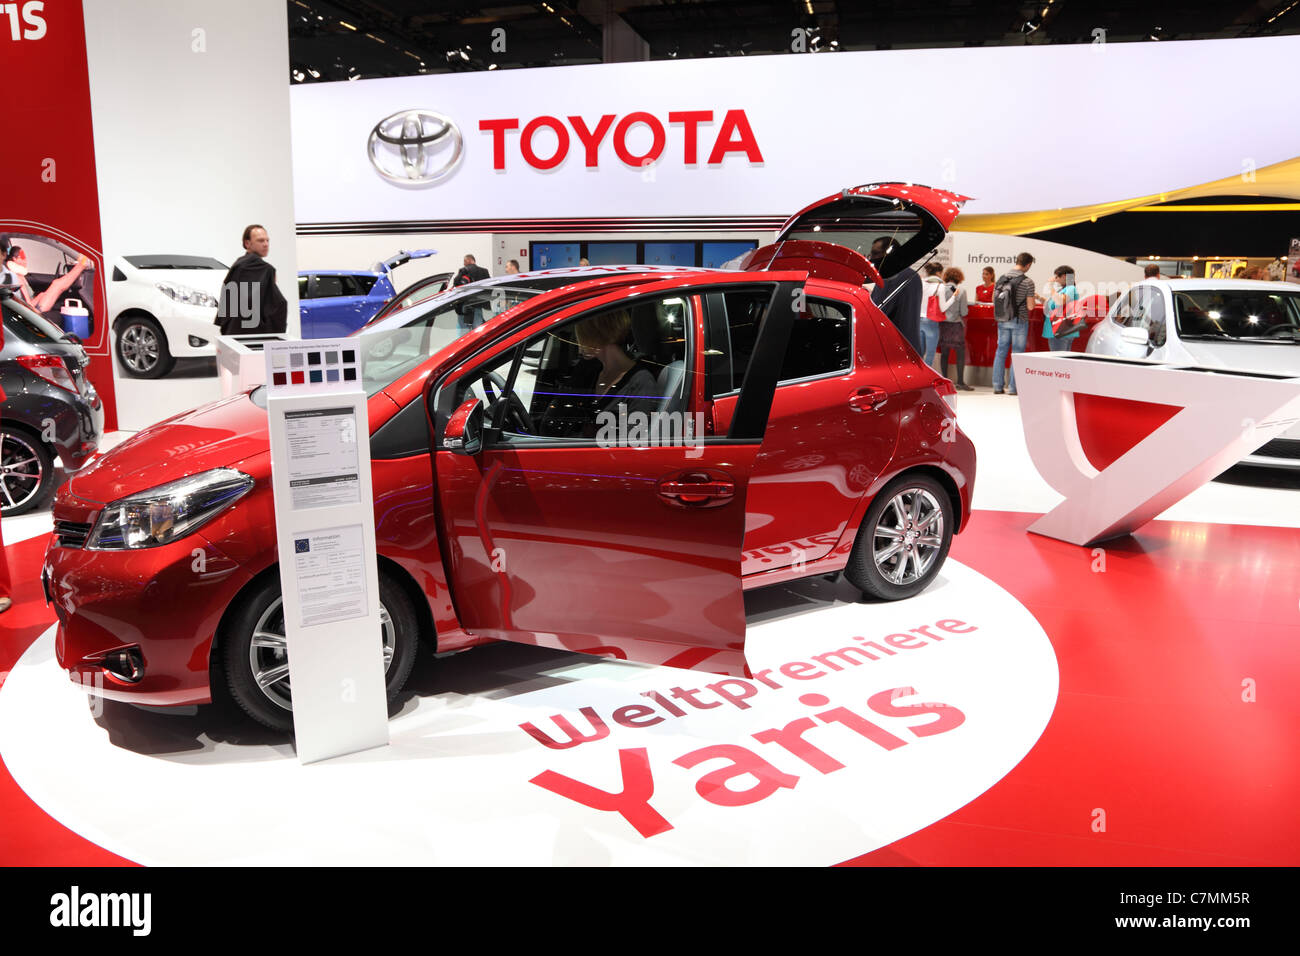 The New Toyota Yaris at the 64th IAA (Internationale Automobil Ausstellung) on September 24, 2011 in Frankfurt Stock Photo